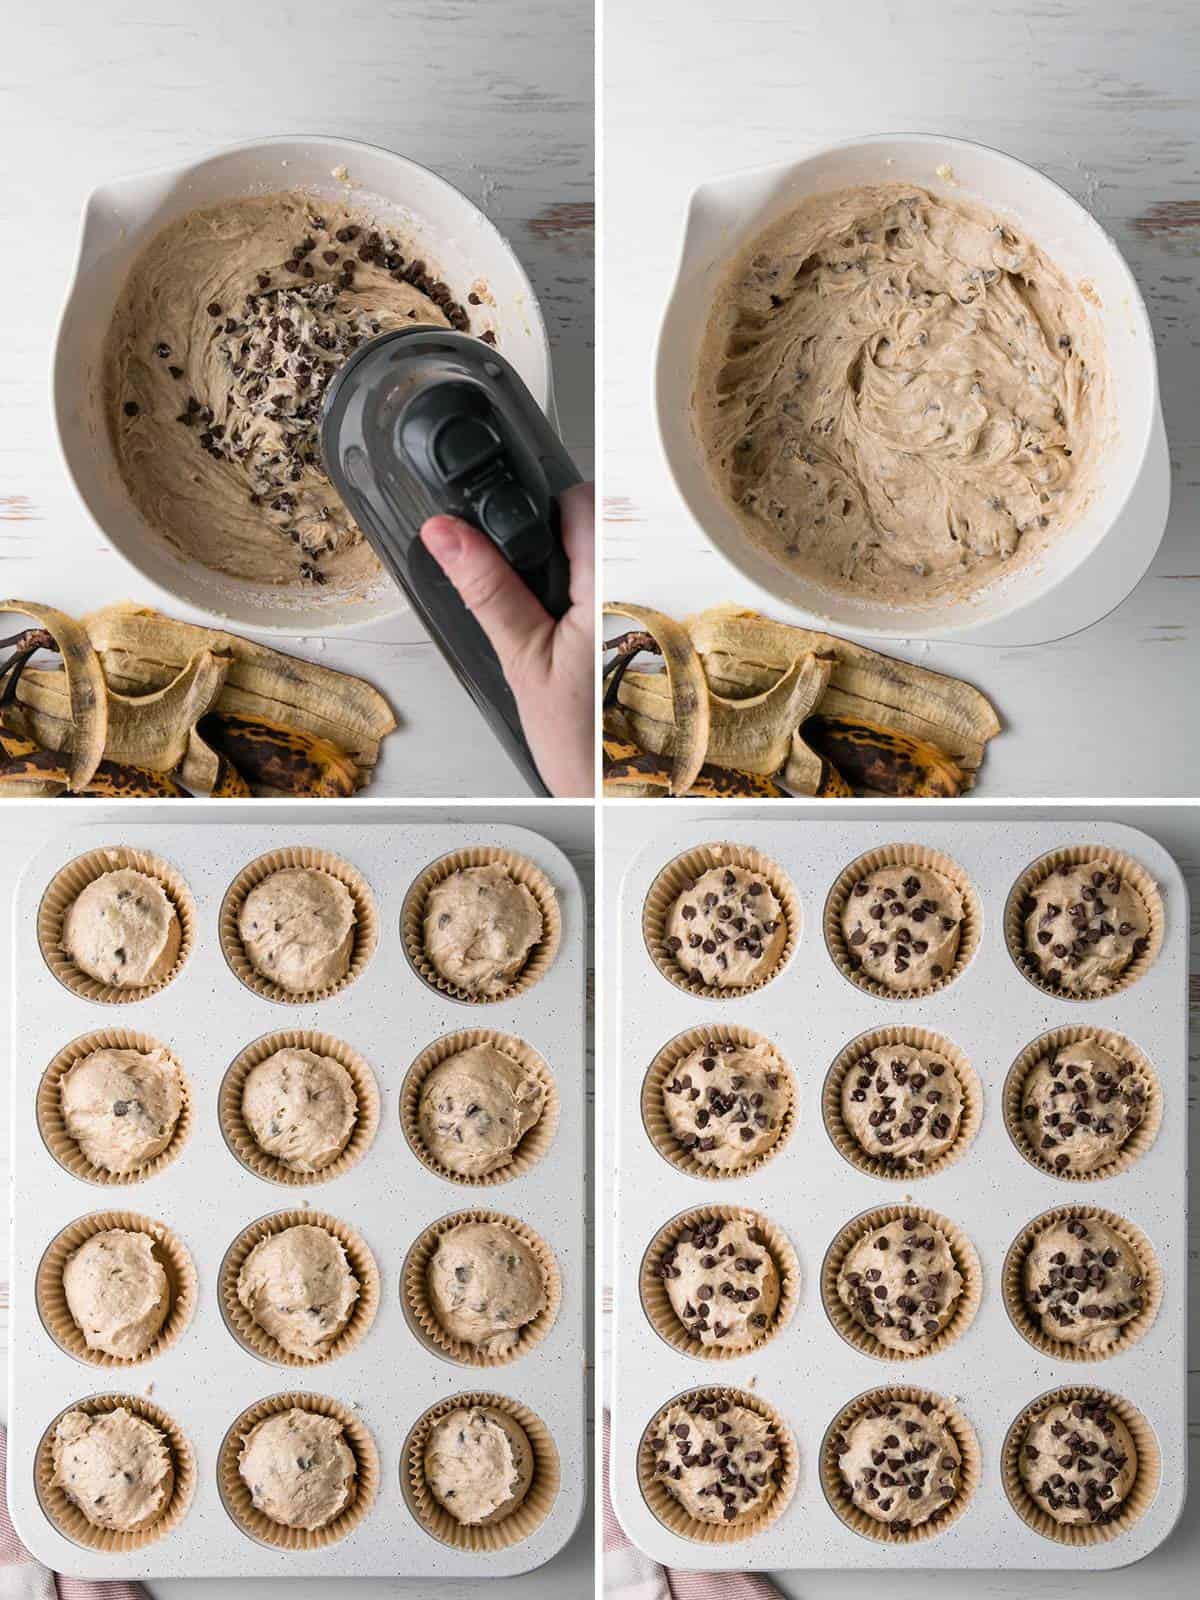 Stirring in chocolate chips and scooping into muffin tins.